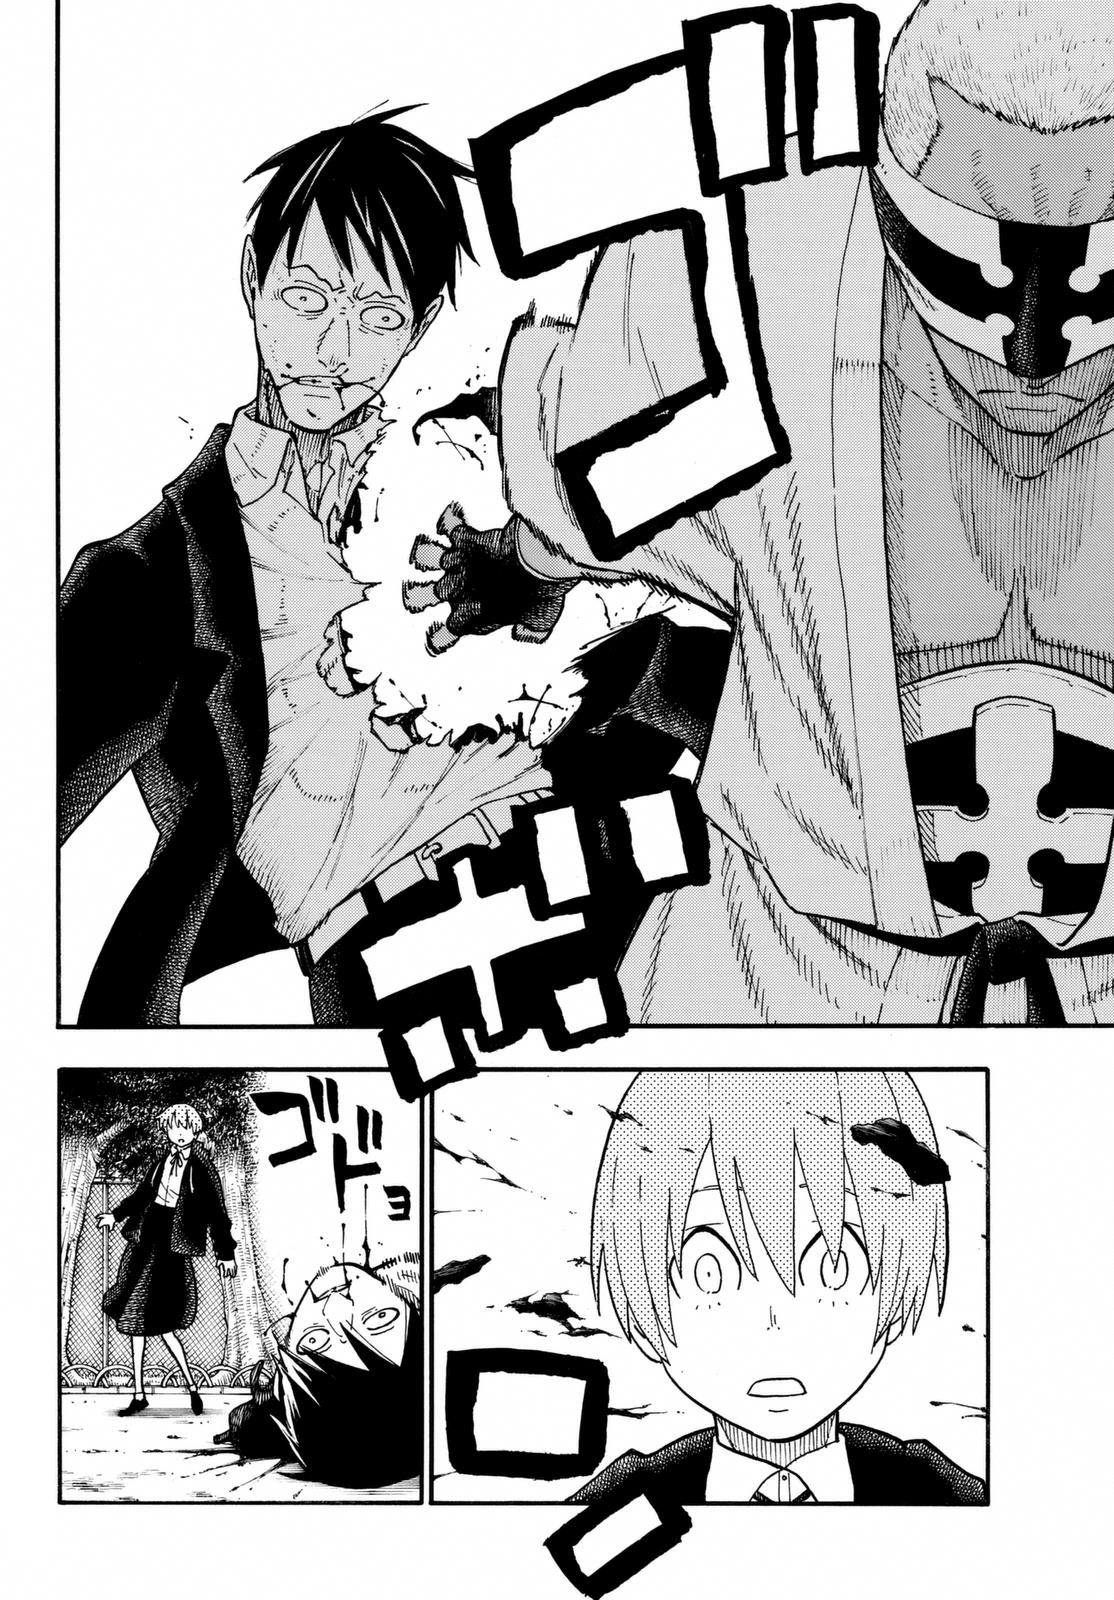 Fire Force Vol. 12 Ch. 101 Tragedy in the Flames